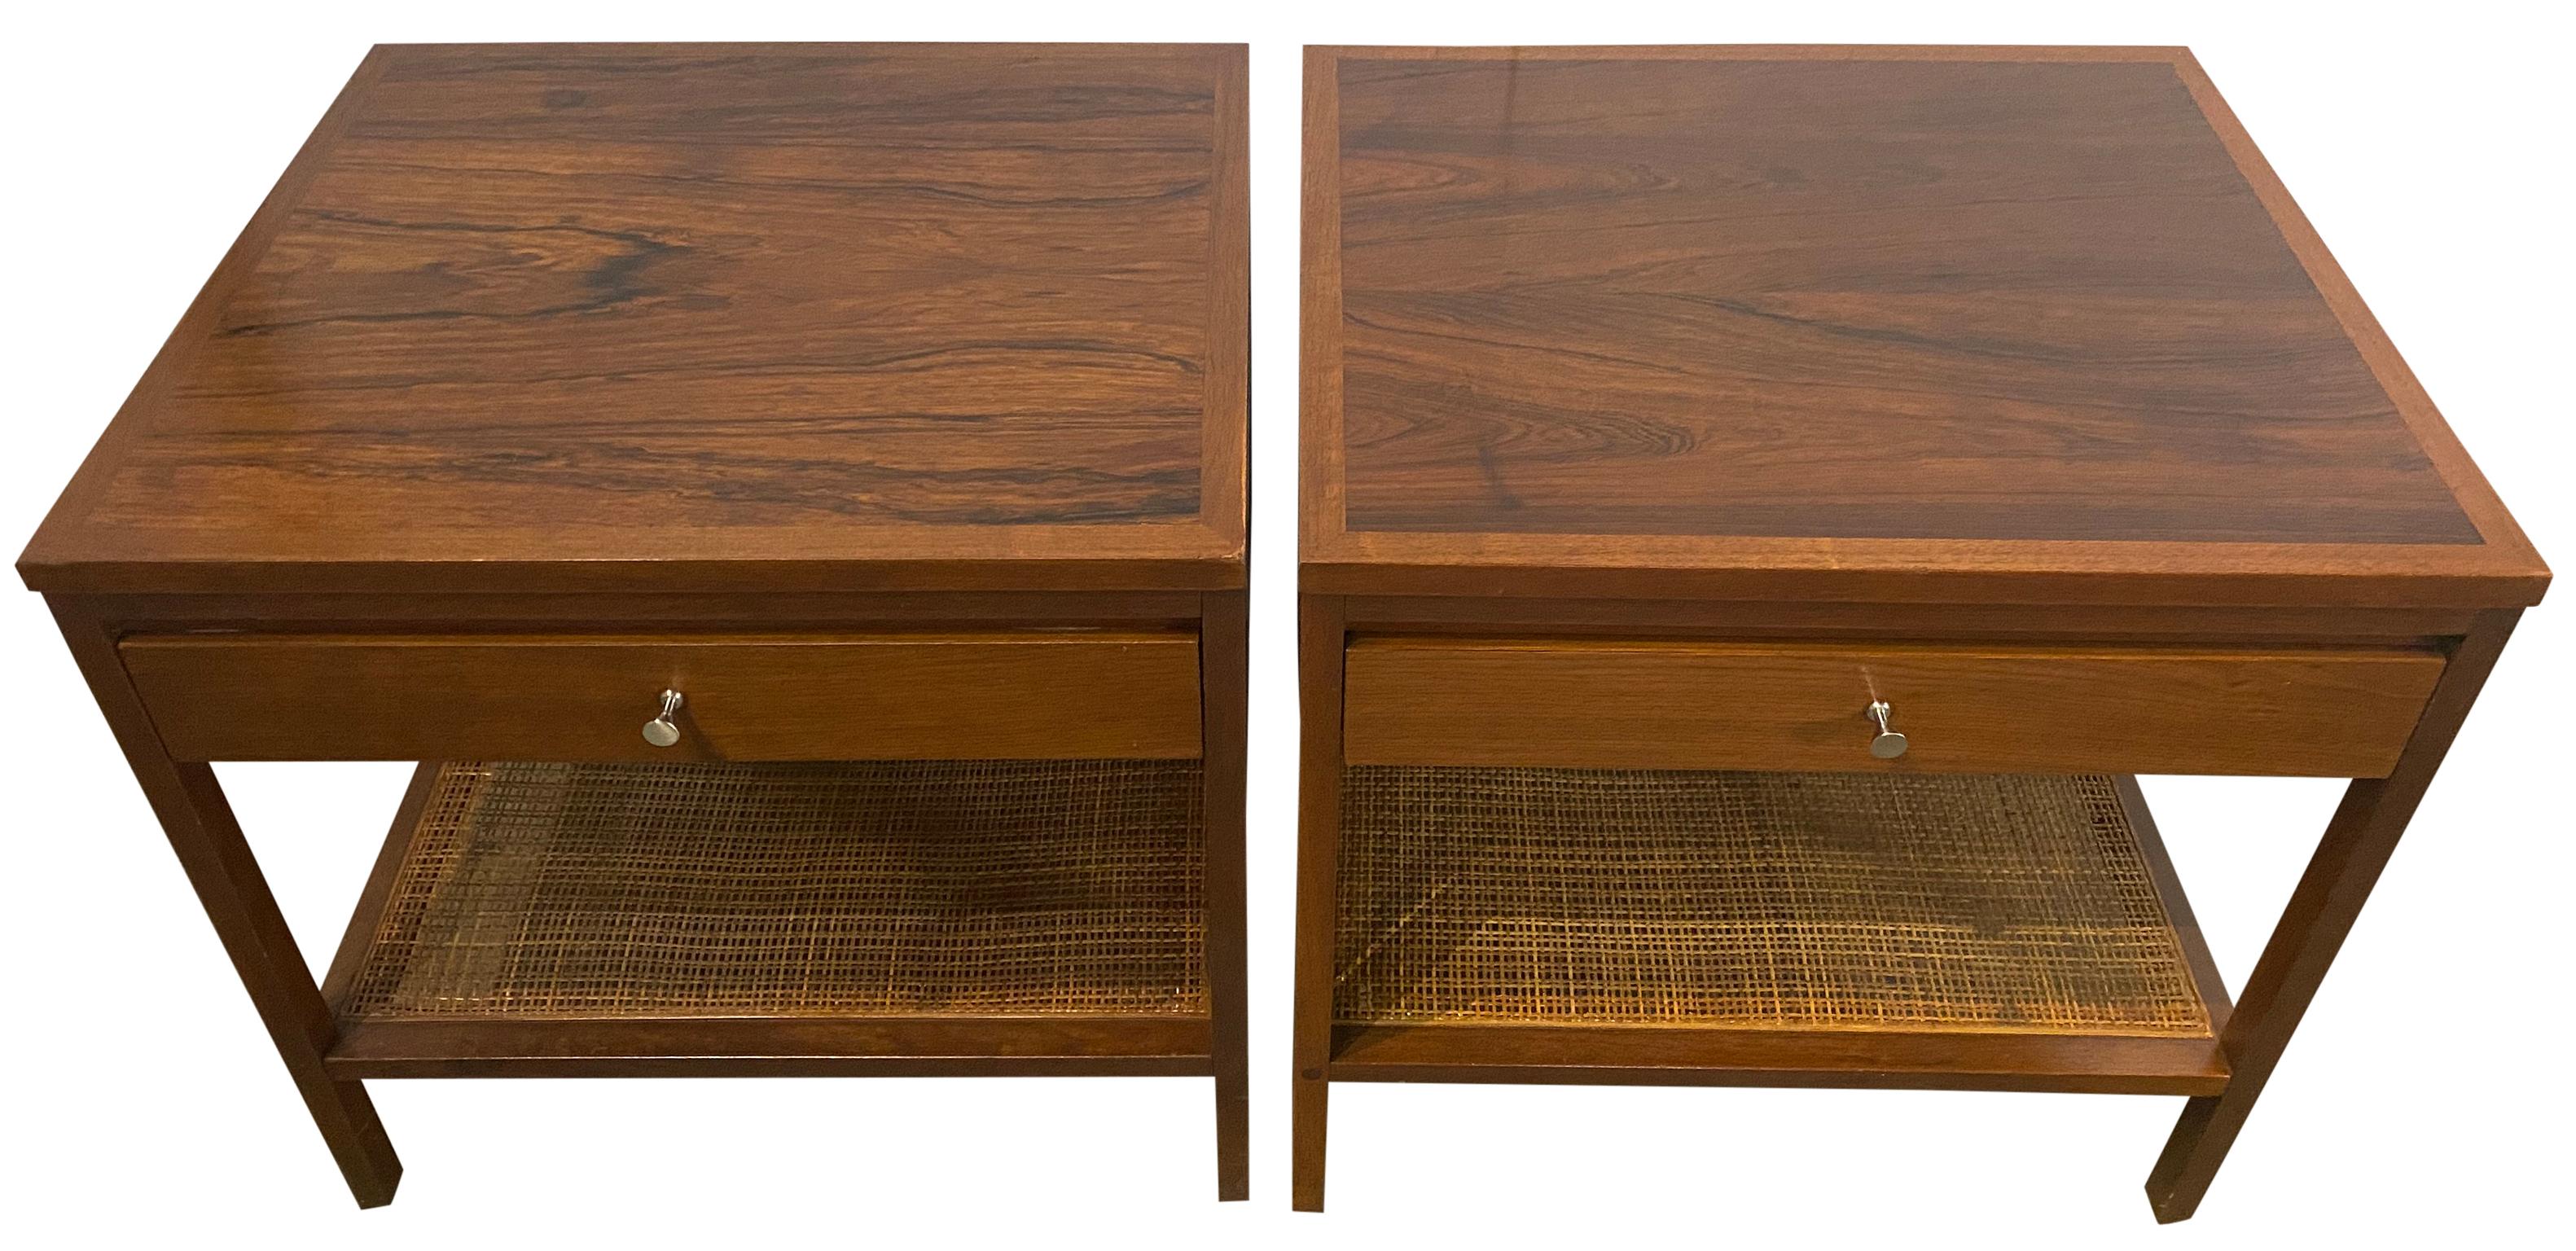 Beautiful pair of Paul McCobb for Lane rosewood/walnut pair of nightstands side lamp tables with lower cane shelf stunning. Geometric Paul McCobb design. Very rare nightstands labeled Lane Alta-vista/delineator furniture line. Rare set high quality